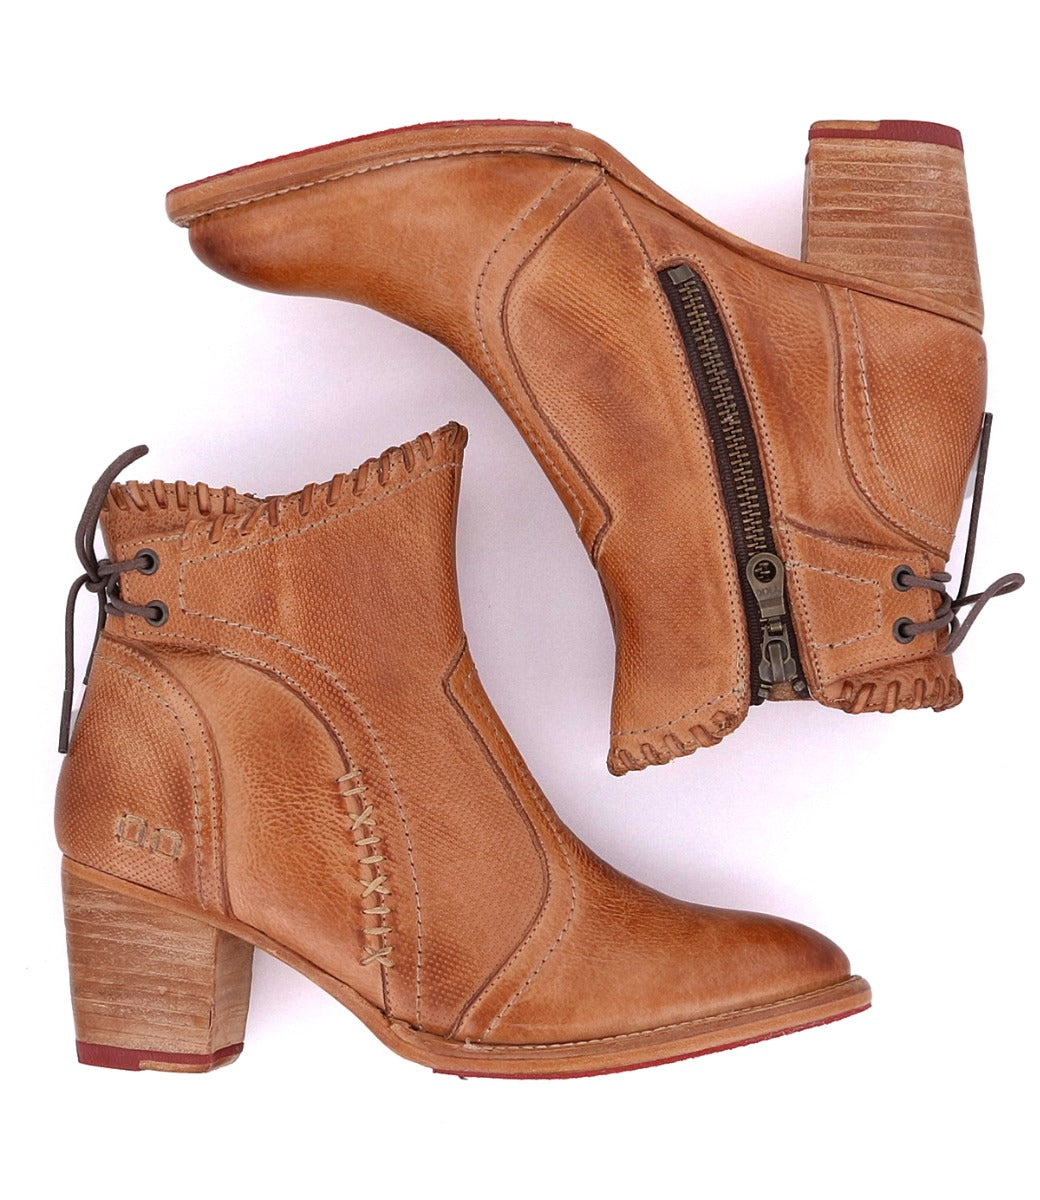 A pair of Bia ankle boots by Bed Stu.